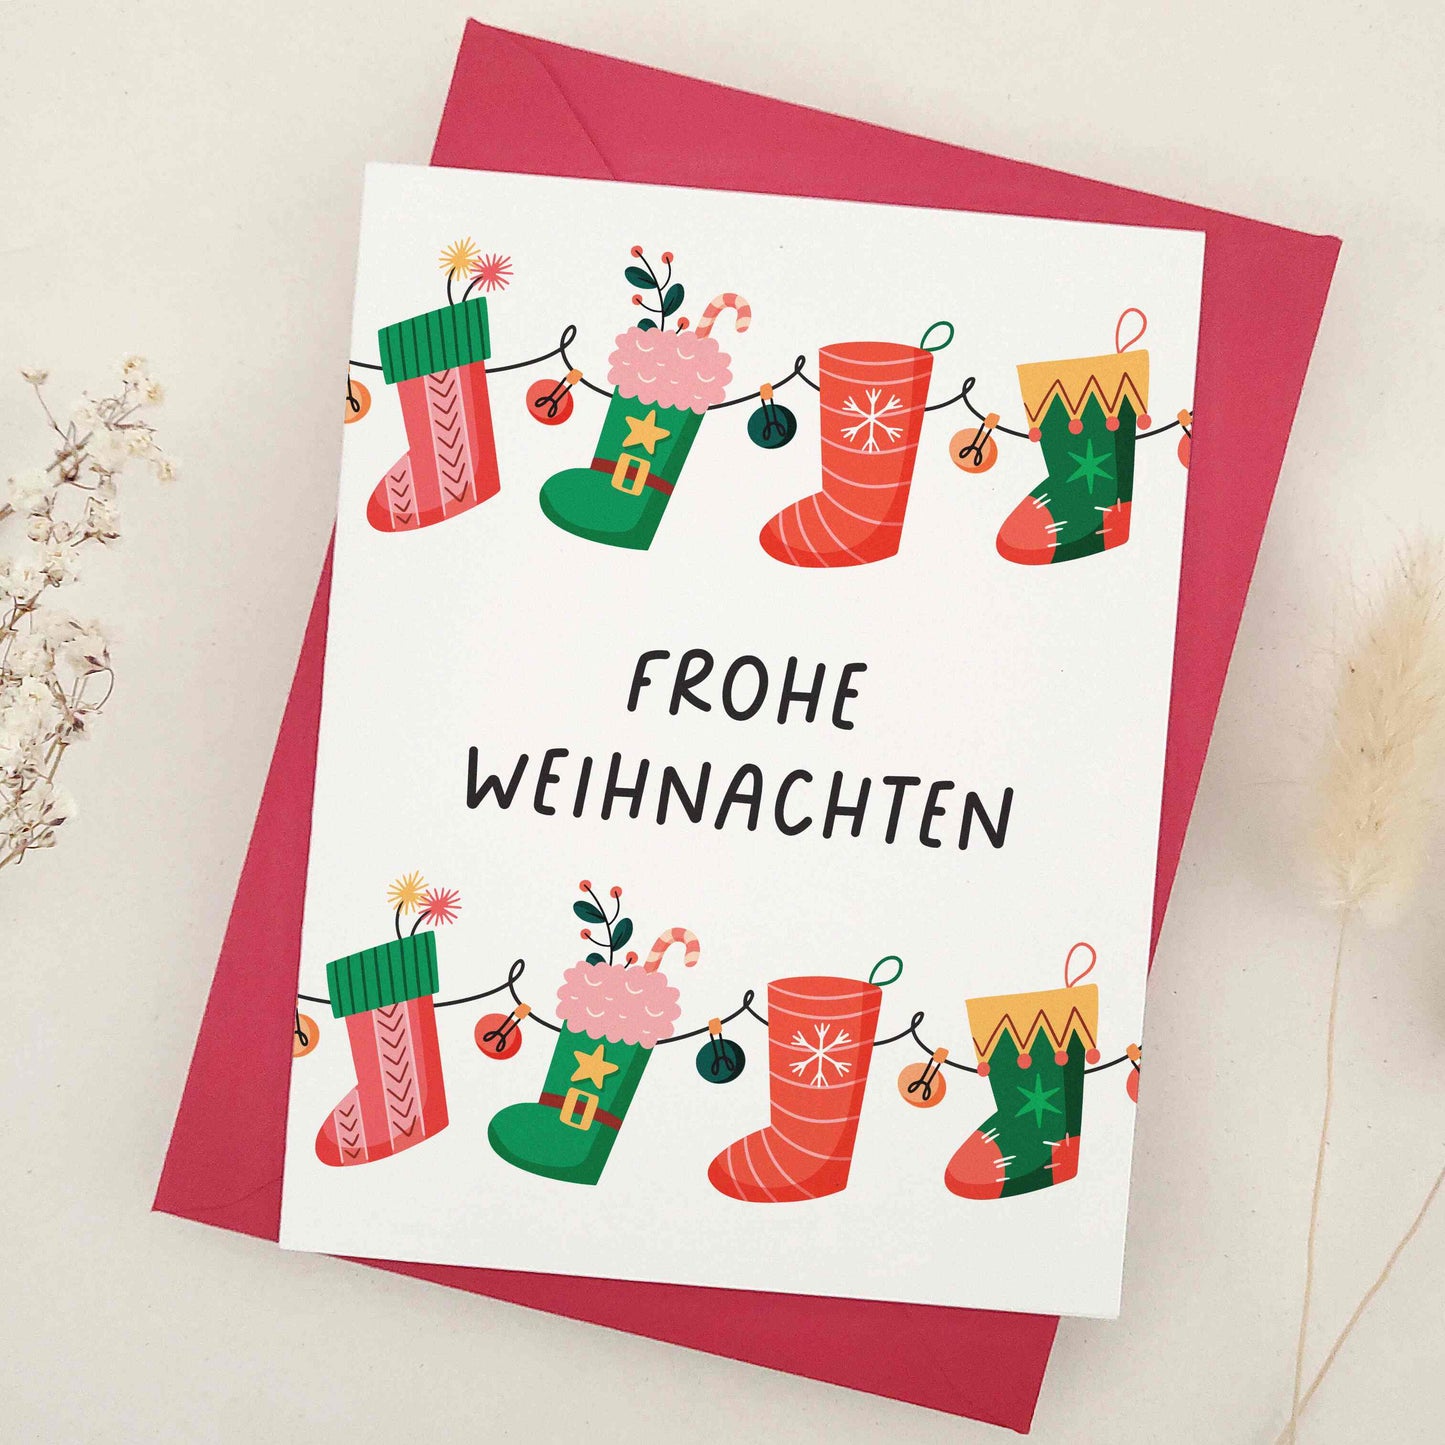 Delightful 'Frohe Weihnachten' card adorned with whimsical Christmas stockings, each festively decorated to capture the cozy and cheerful spirit of the season. The stockings, strung together like a garland, symbolize the connection and joy of the holidays. This card combines traditional German holiday charm with a touch of whimsy, making it perfect for sharing festive wishes.